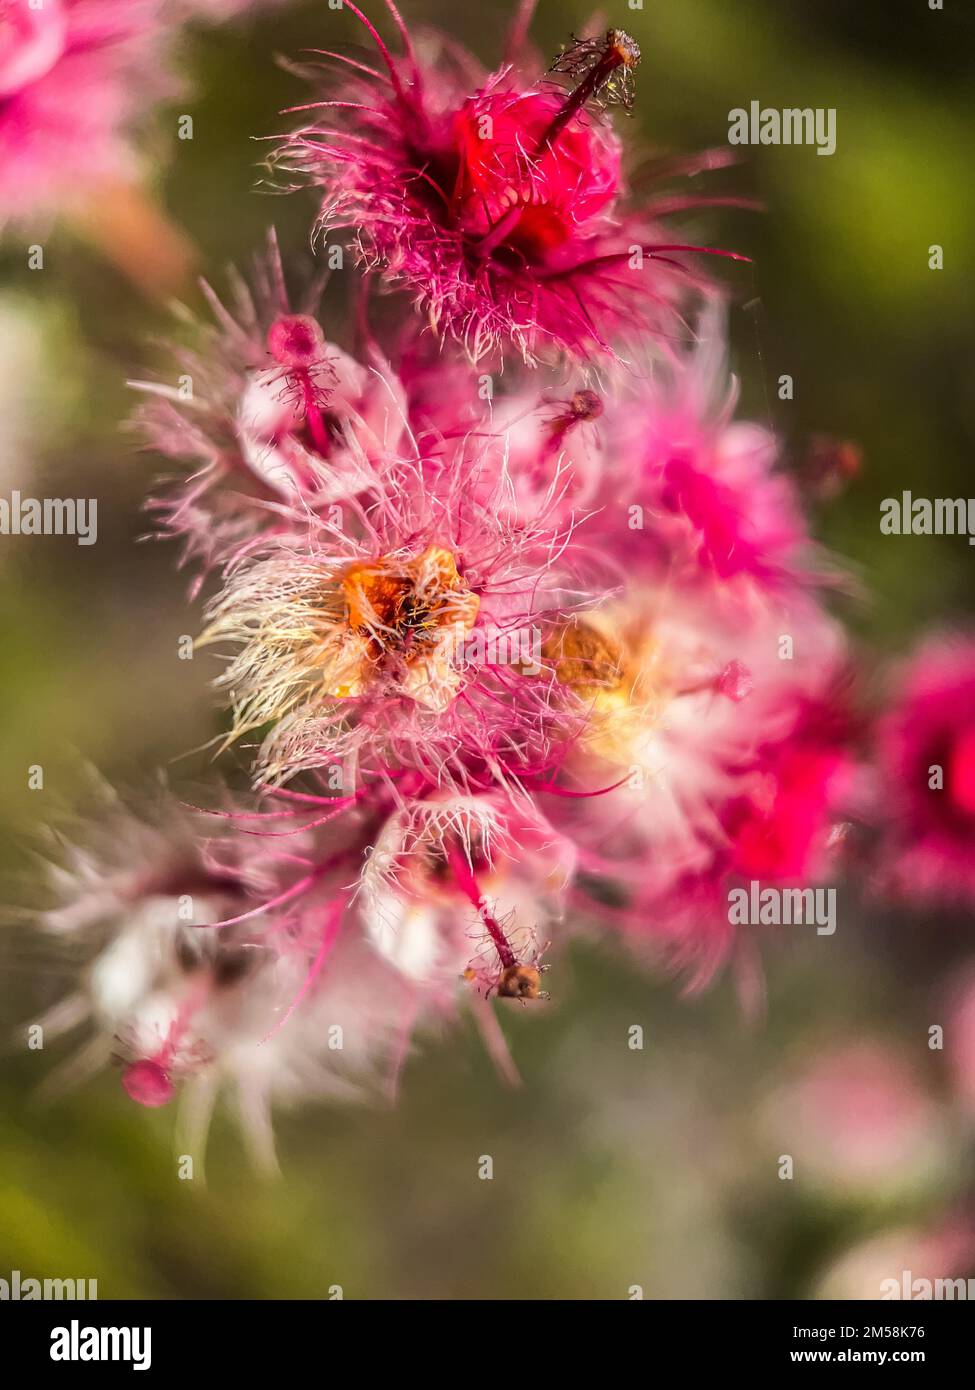 A vertical shot of verticordia flowers growing in a garden under the sunlight with a blurry background Stock Photo